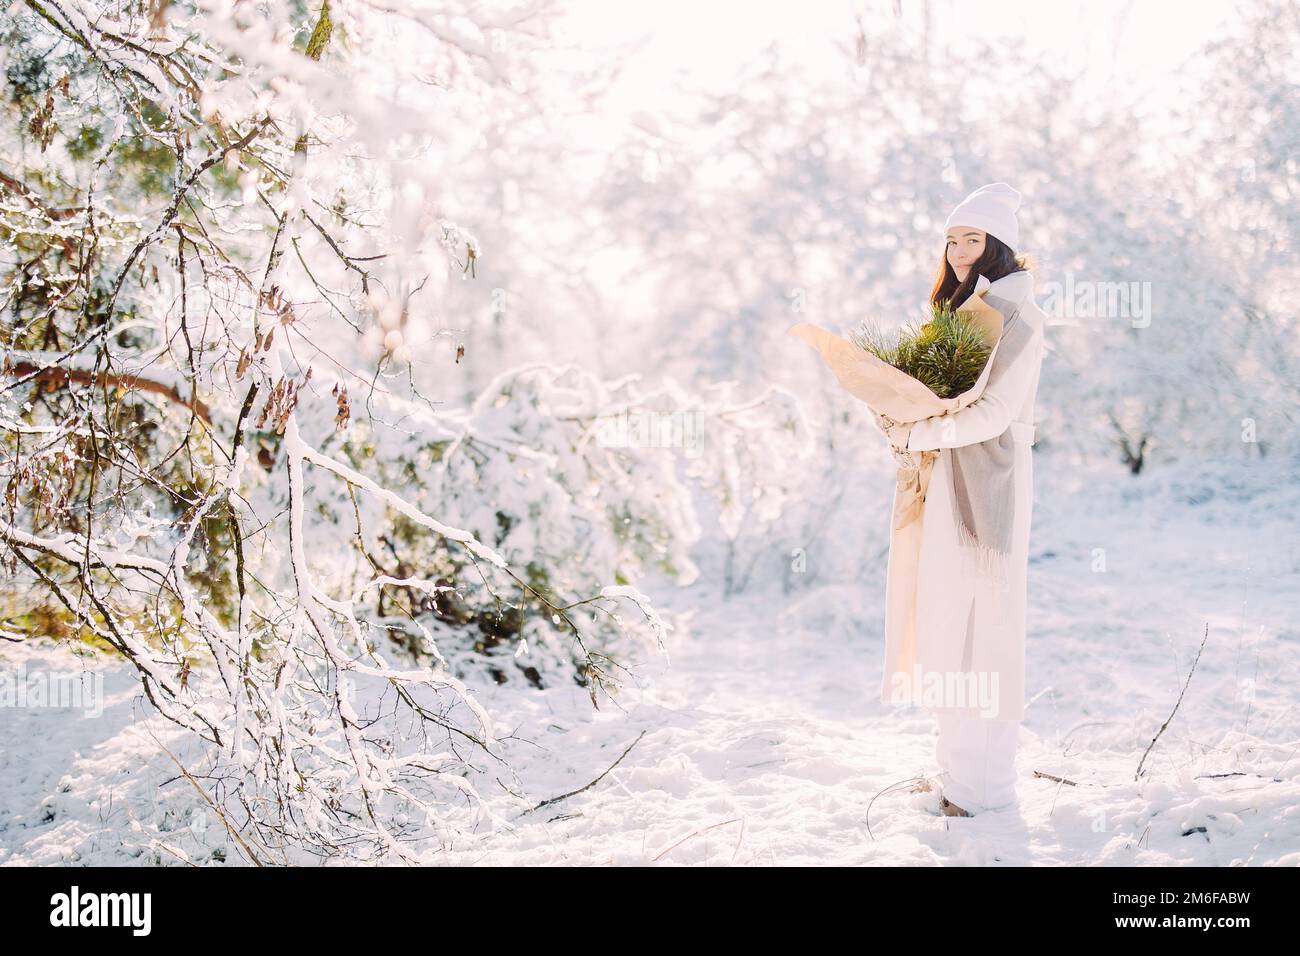 Happy young woman walks in forest among snow covered trees in sunny winter day with bouquet from pine branches in her hands. Stock Photo